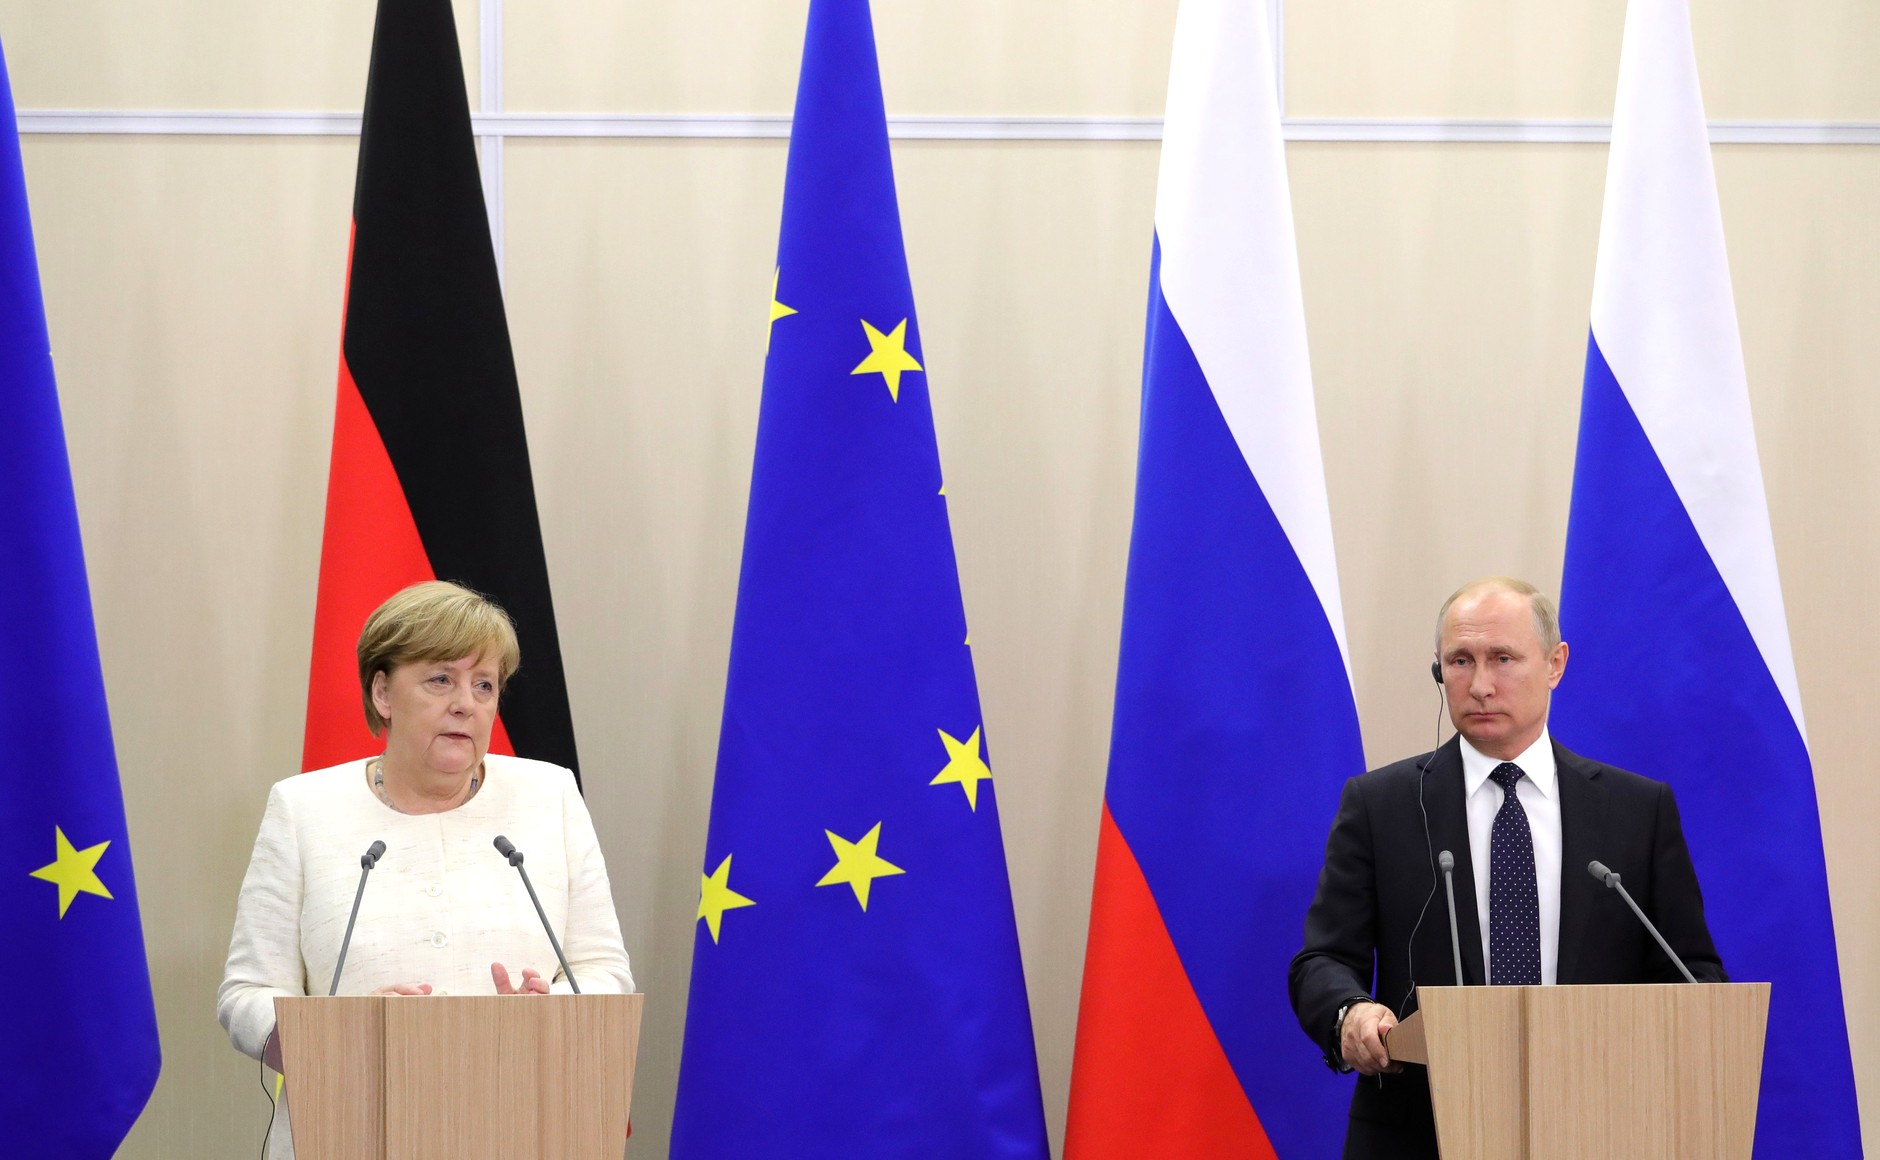 Russian President Vladimir Putin during a meeting with Federal Chancellor of Germany Angela Merkel in 2018. ©Wikimediacommons